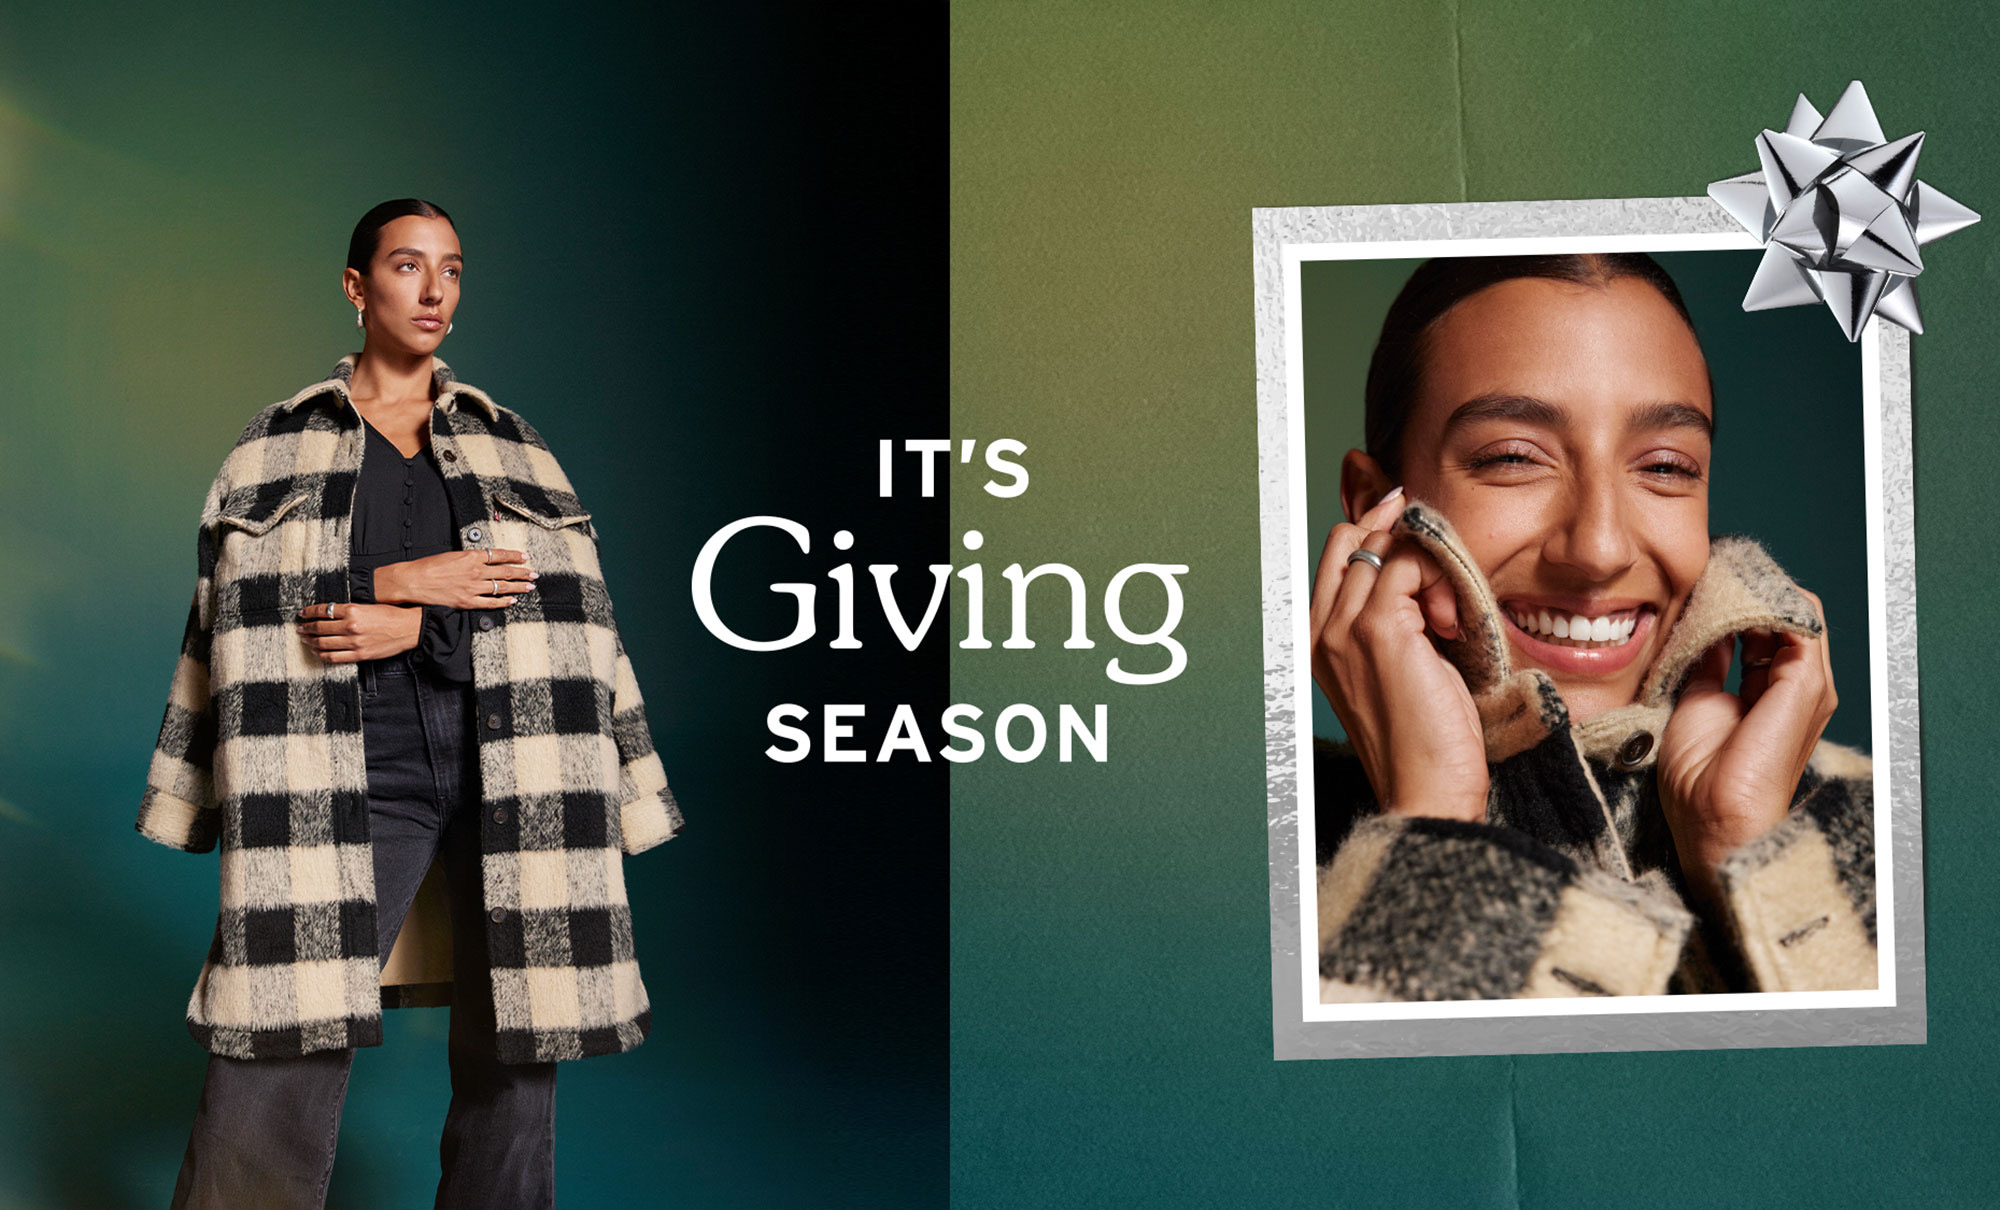 Text reading "It's Giving Season" in between a model wearing a black and white plaid Levi's coat and a photo frame of the same model's headshot with a silver bow on top